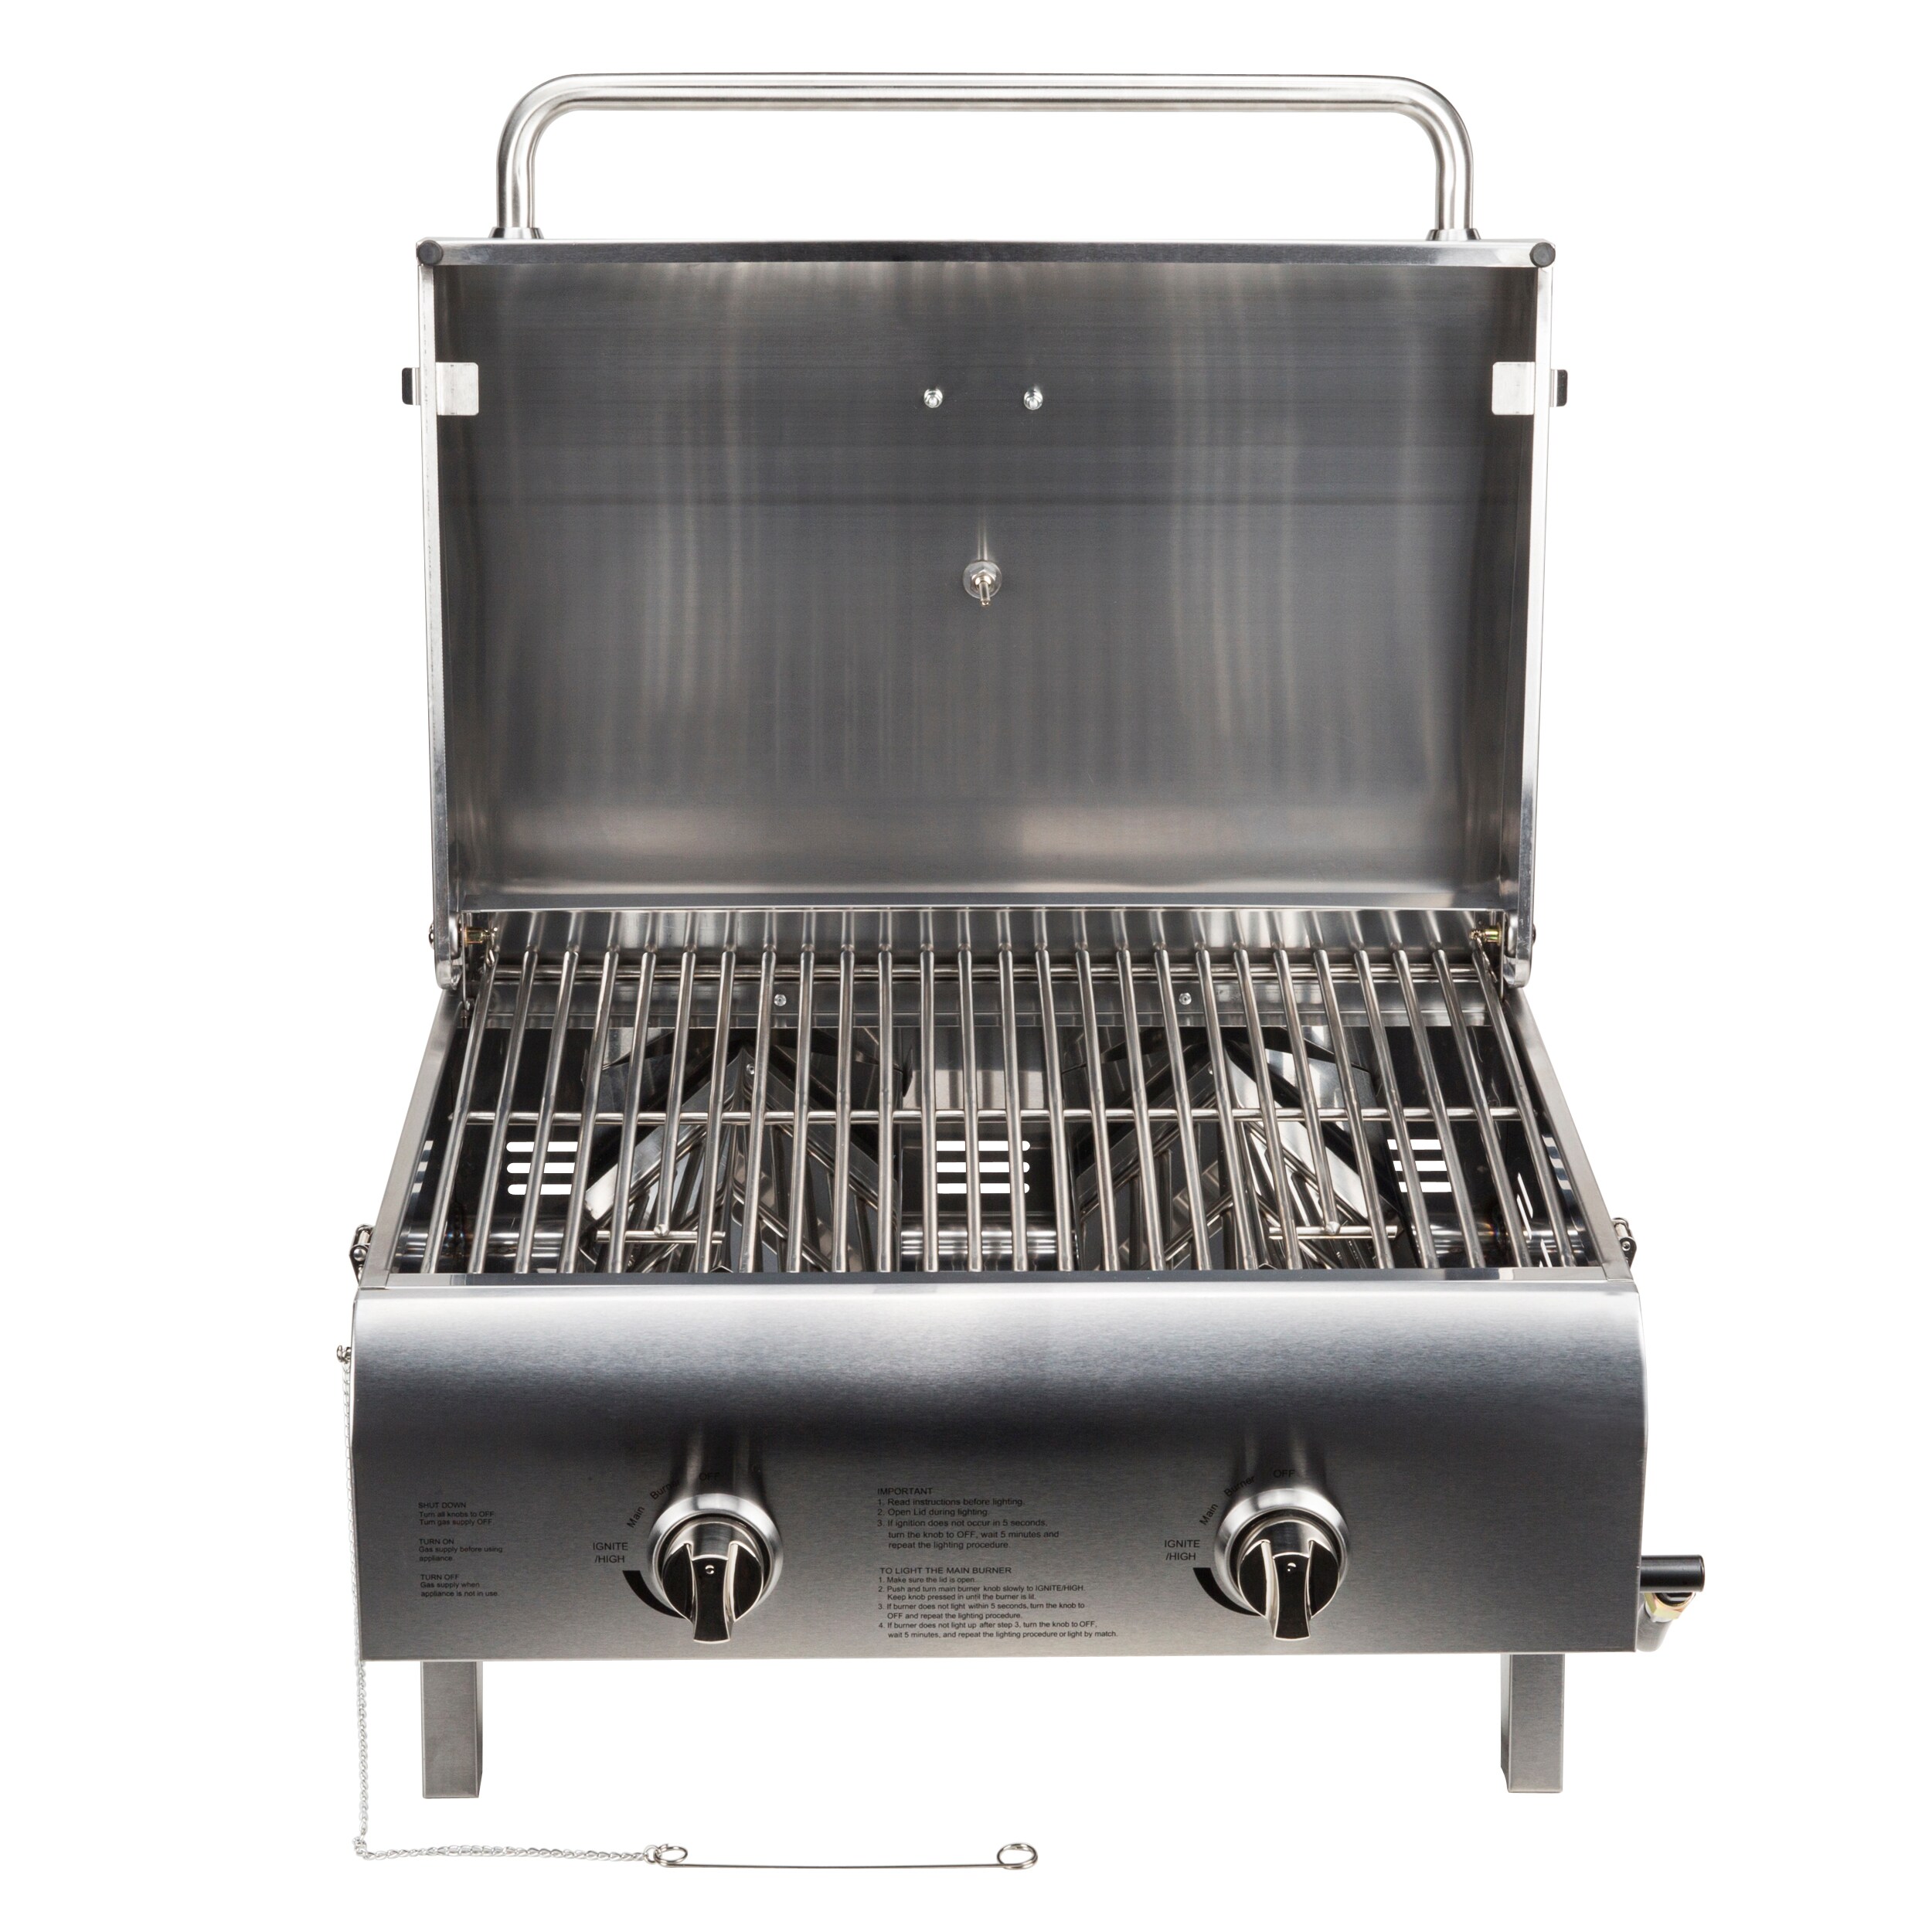 Cuisinart CGG-306 Chef's Style Stainless Tabletop GAS Grill